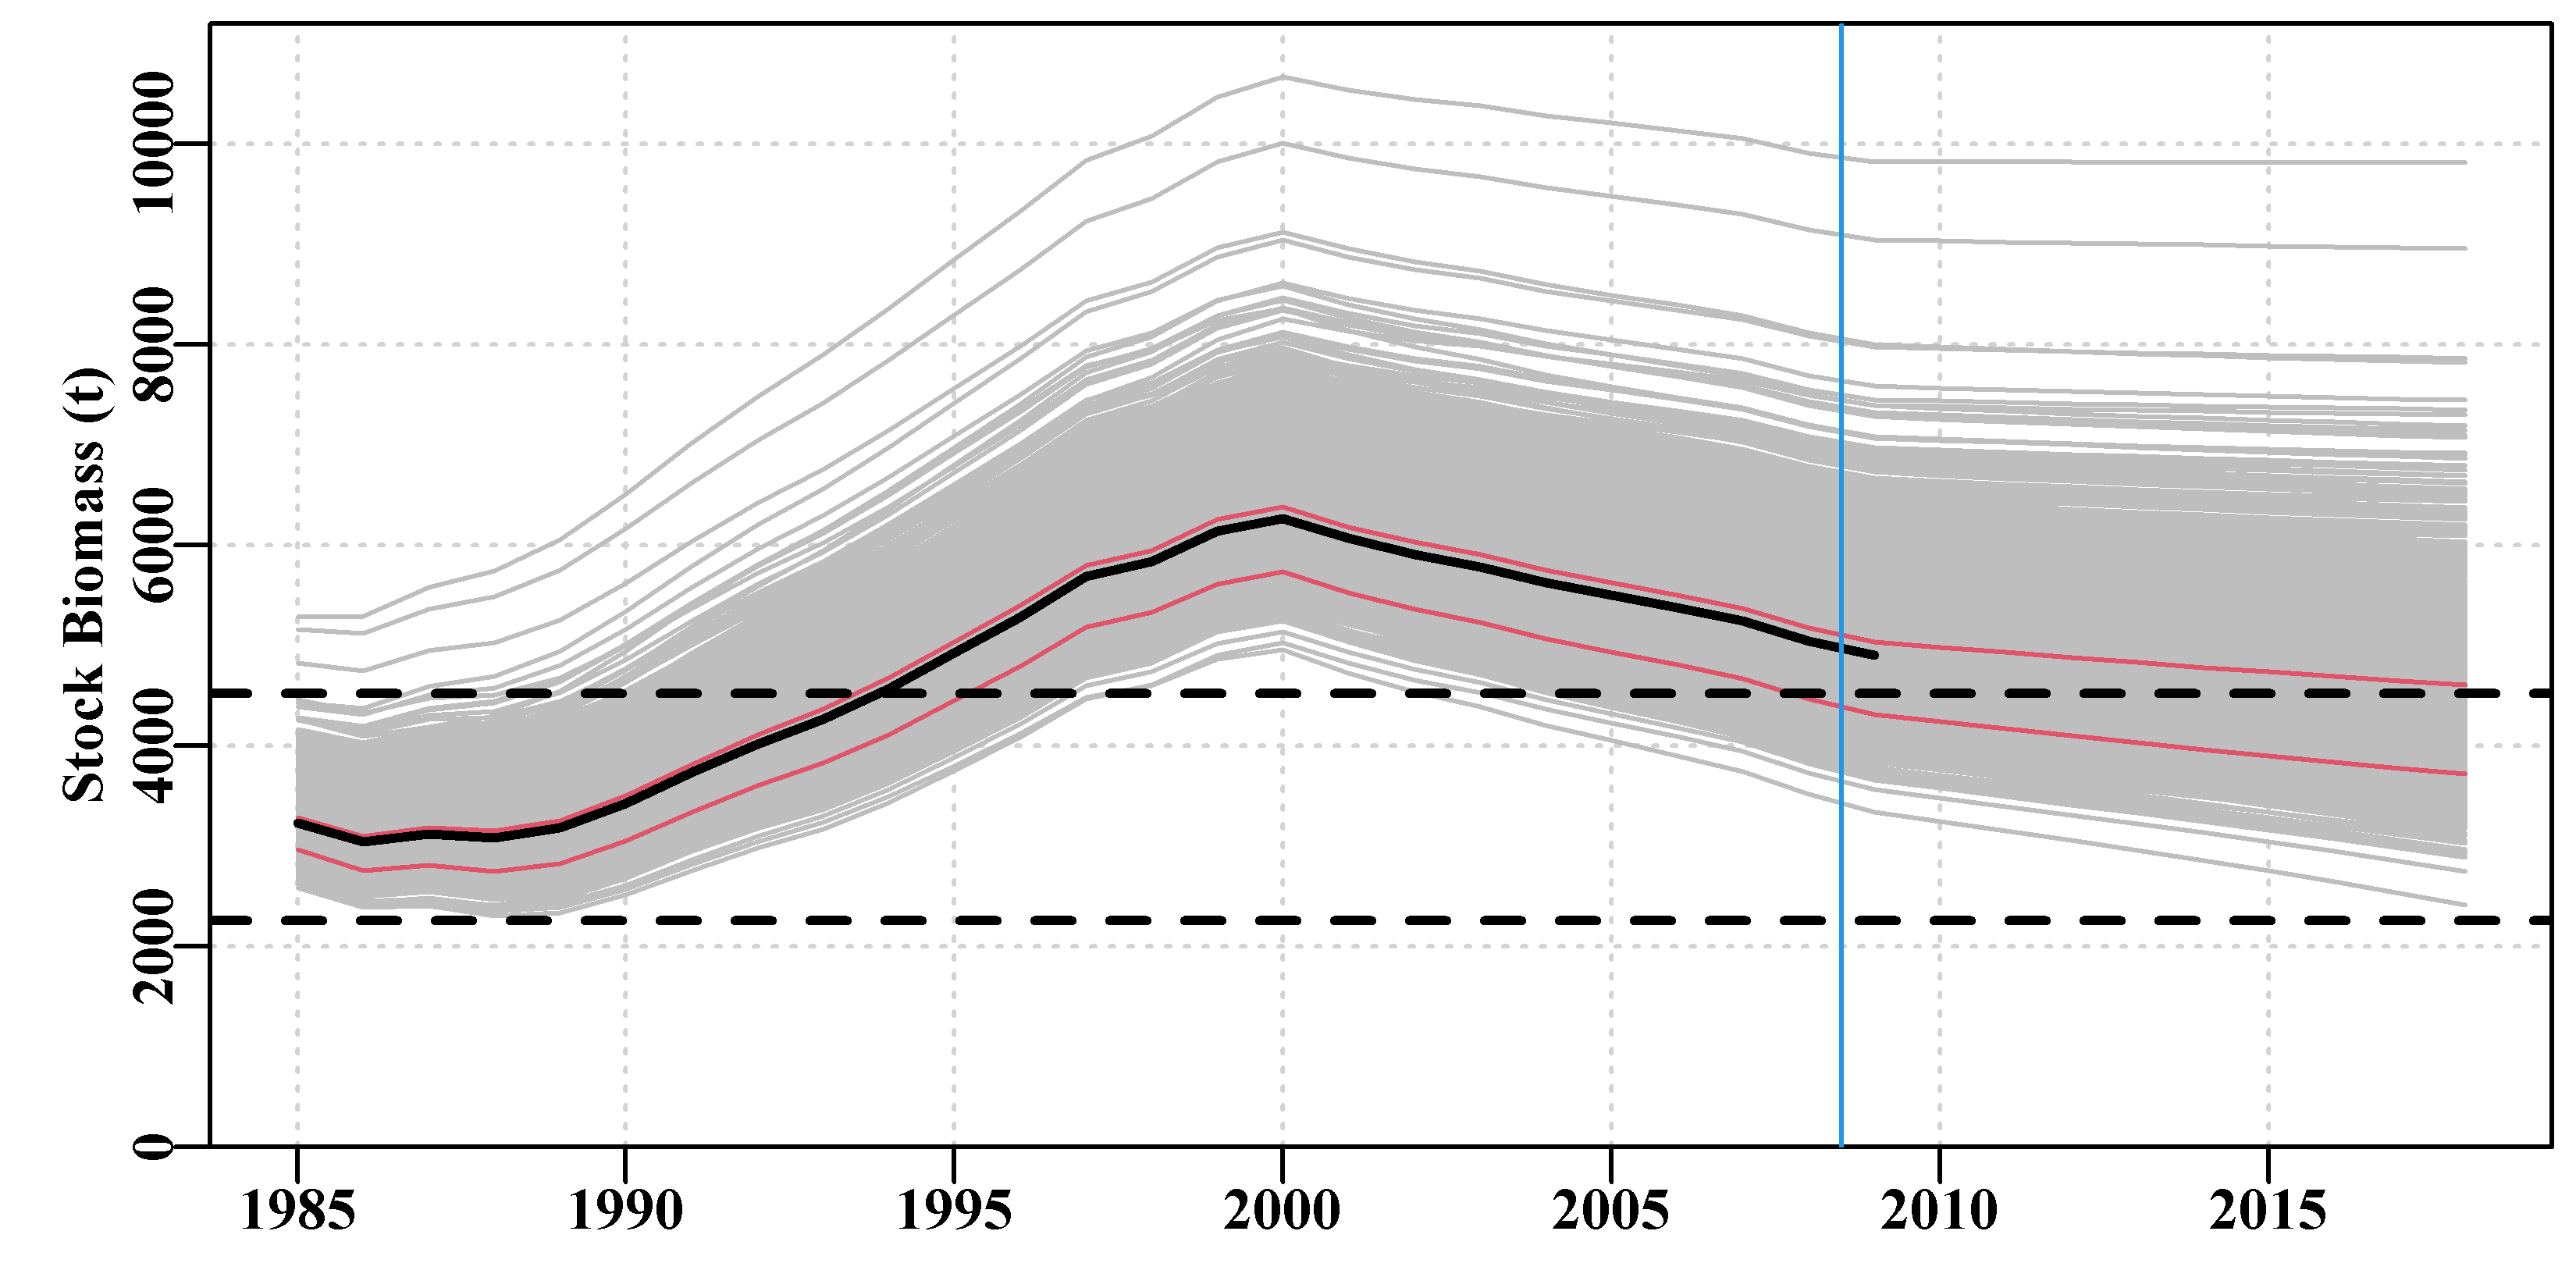 1000 projections (in grey) of a constant catch of 900t, derived from the using 1000 samples from the Bayesian posterior. The dashed lines are the limit and target reference points. The blue vertical line is the limit of fisheries data, the thick black line is the optimum fit and the red lines are the 10th and 50th quantiles across years.